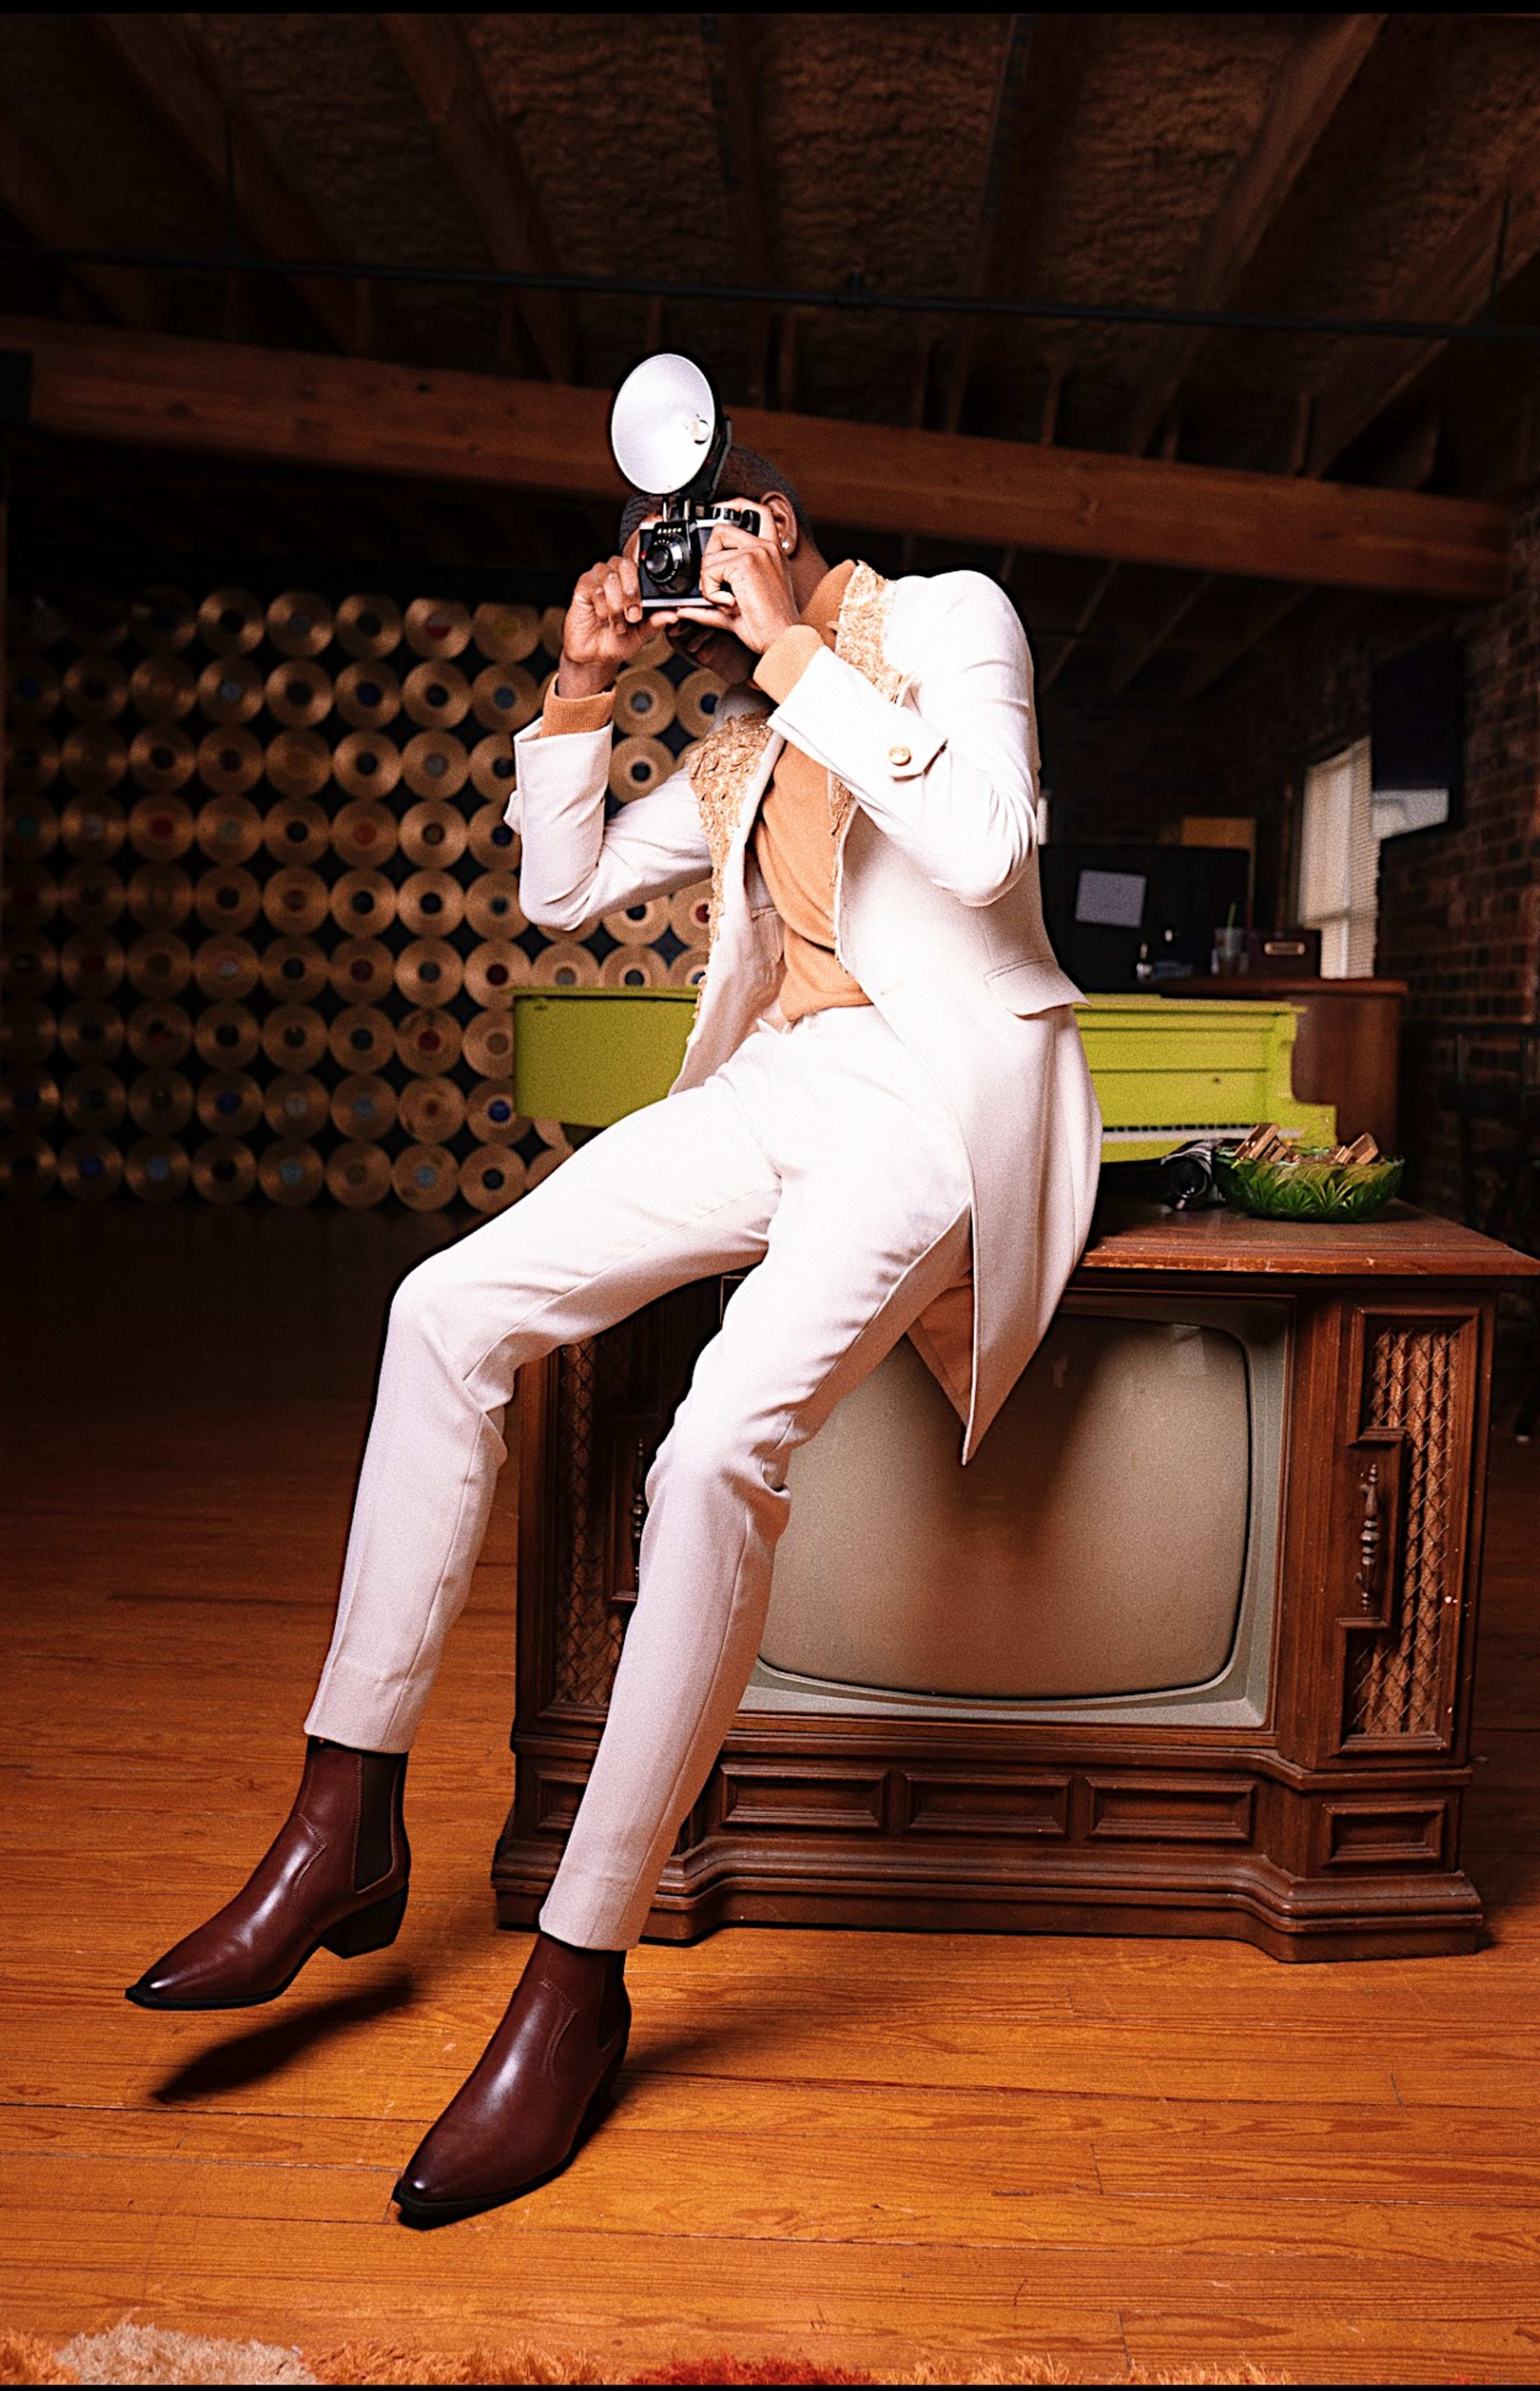 A man in a white suit posing on a brown TV during a retro photoshoot.